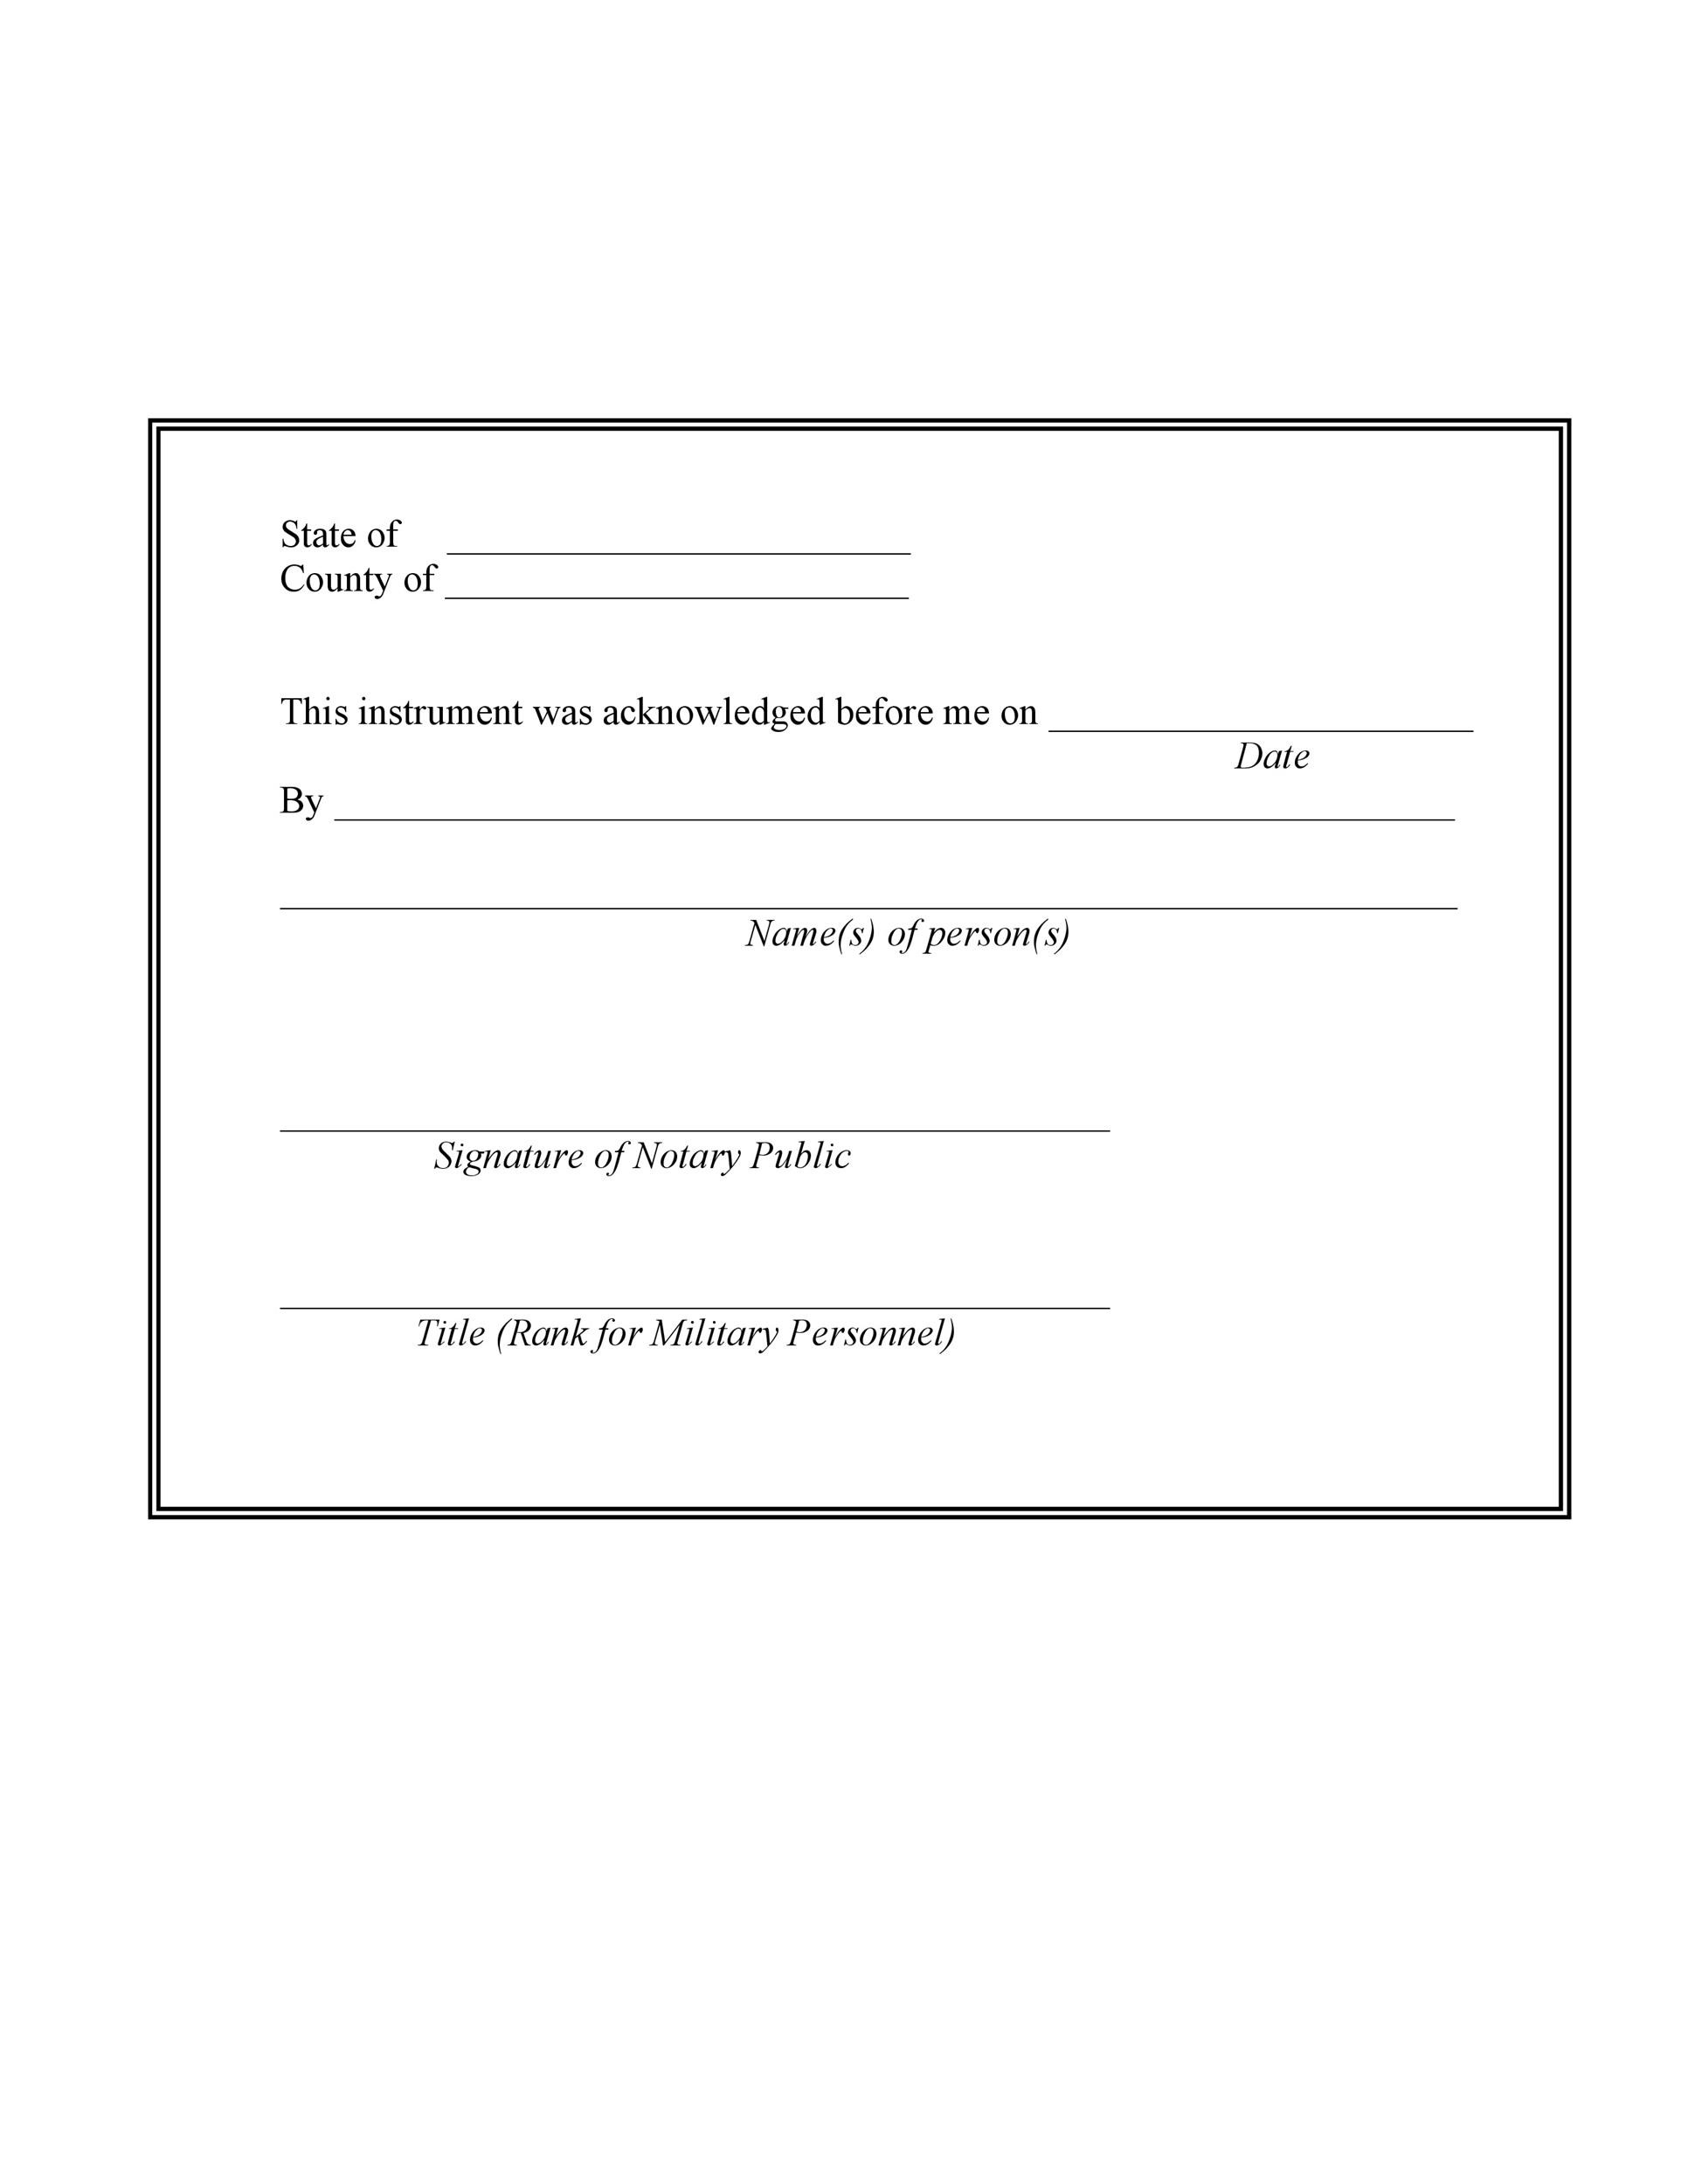 printable-notary-forms-tutore-org-master-of-documents-gambaran